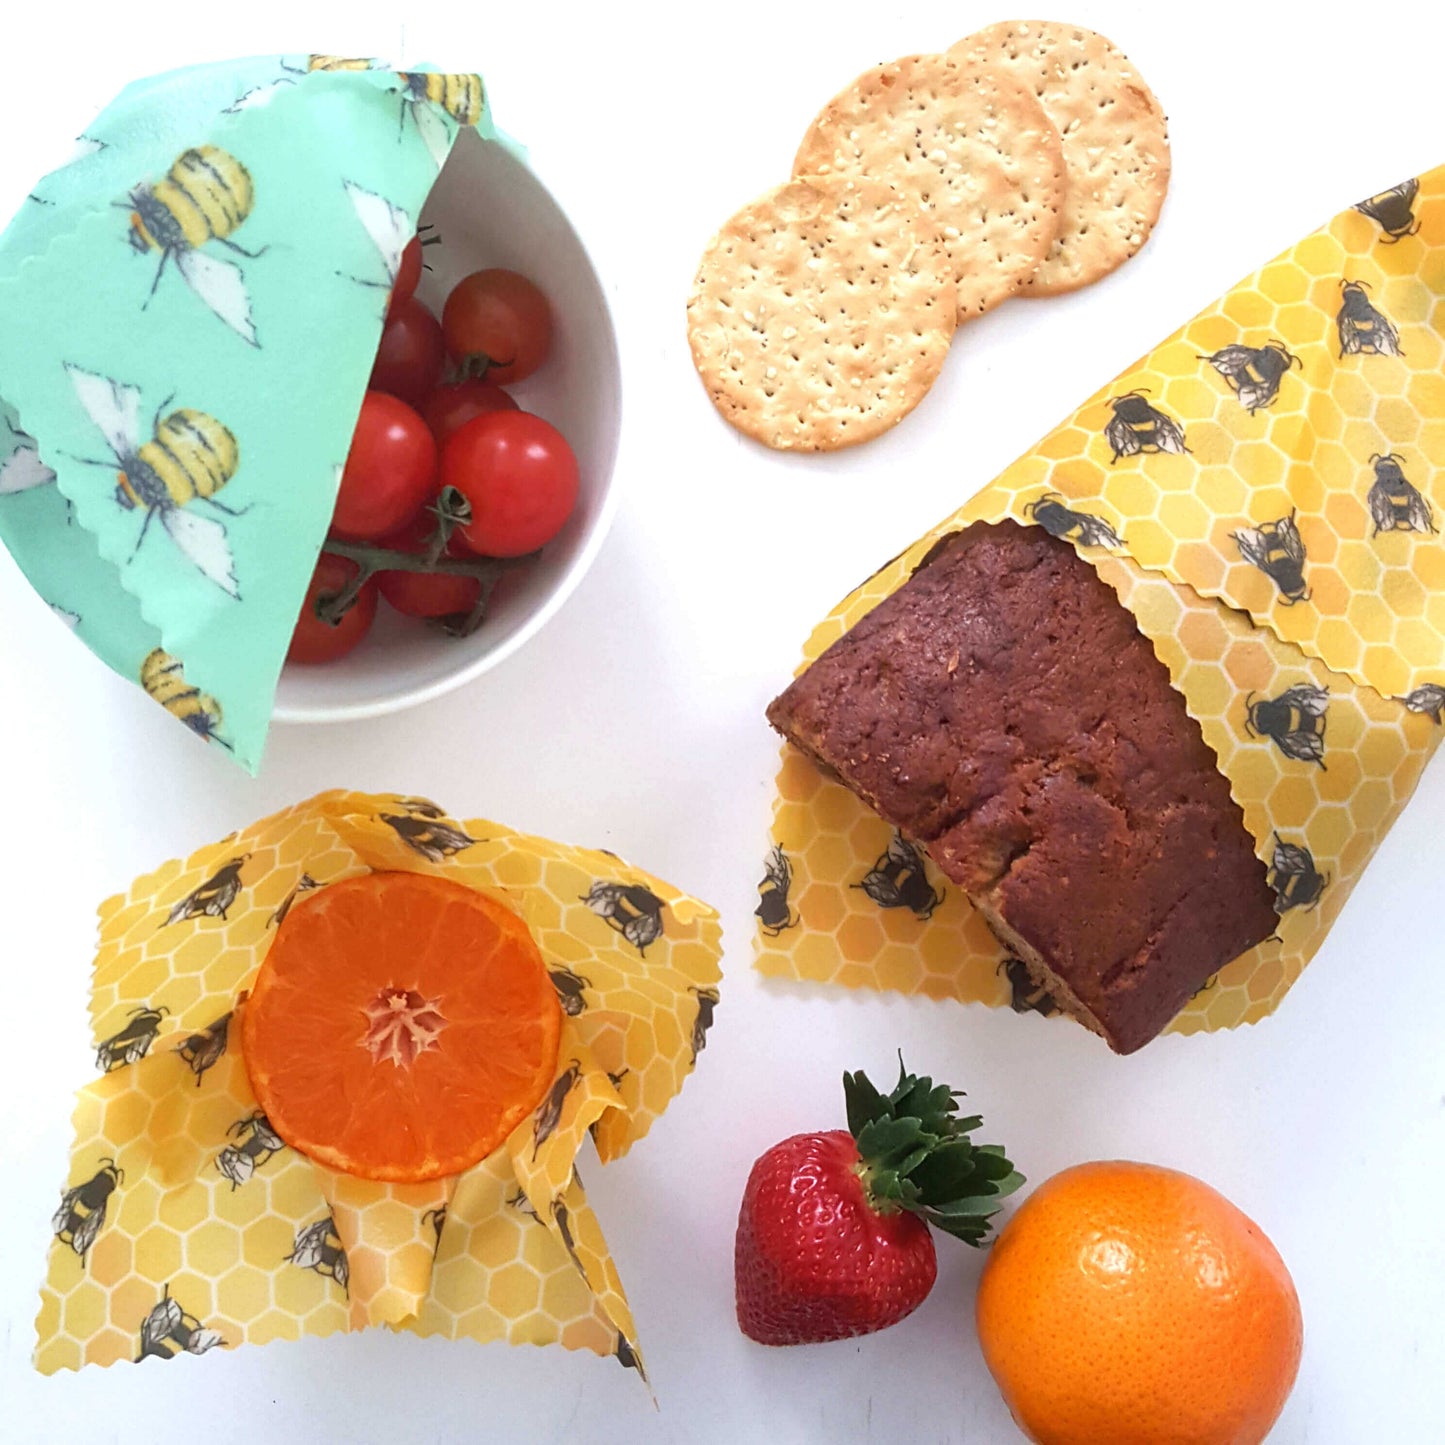 Reusable Beeswax Food Wraps 100% Hand Made in the UK by Honey Bee Good shown in Set of 3 Classic Bee Happy pattern flatlay